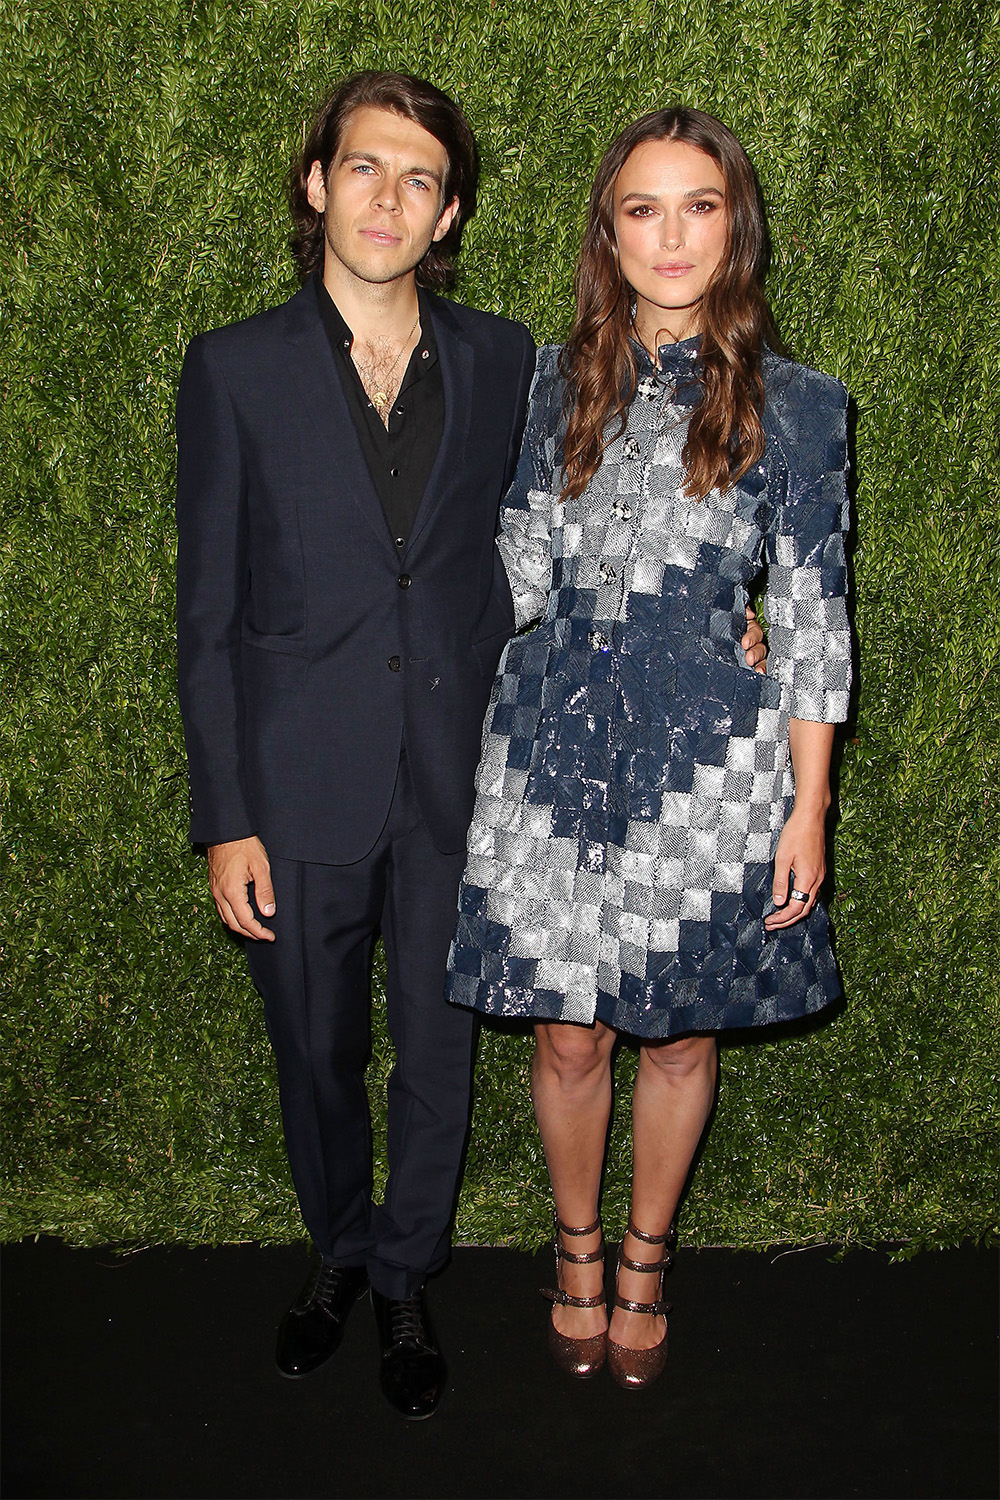 Keira Knighley and Husband James Righton's Relationship Timeline